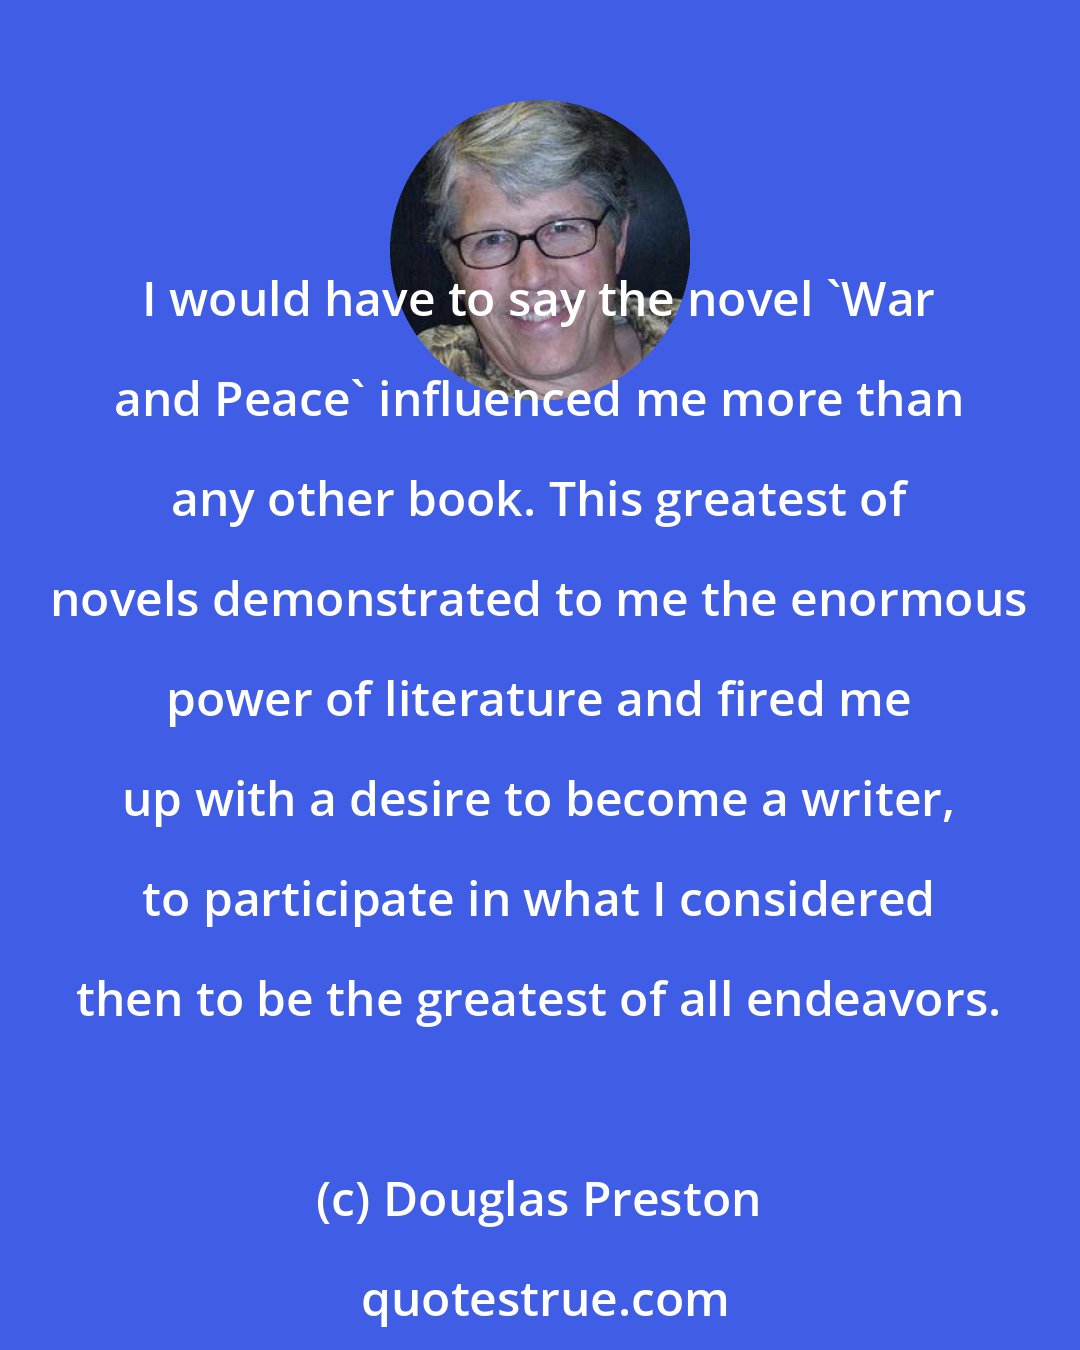 Douglas Preston: I would have to say the novel 'War and Peace' influenced me more than any other book. This greatest of novels demonstrated to me the enormous power of literature and fired me up with a desire to become a writer, to participate in what I considered then to be the greatest of all endeavors.